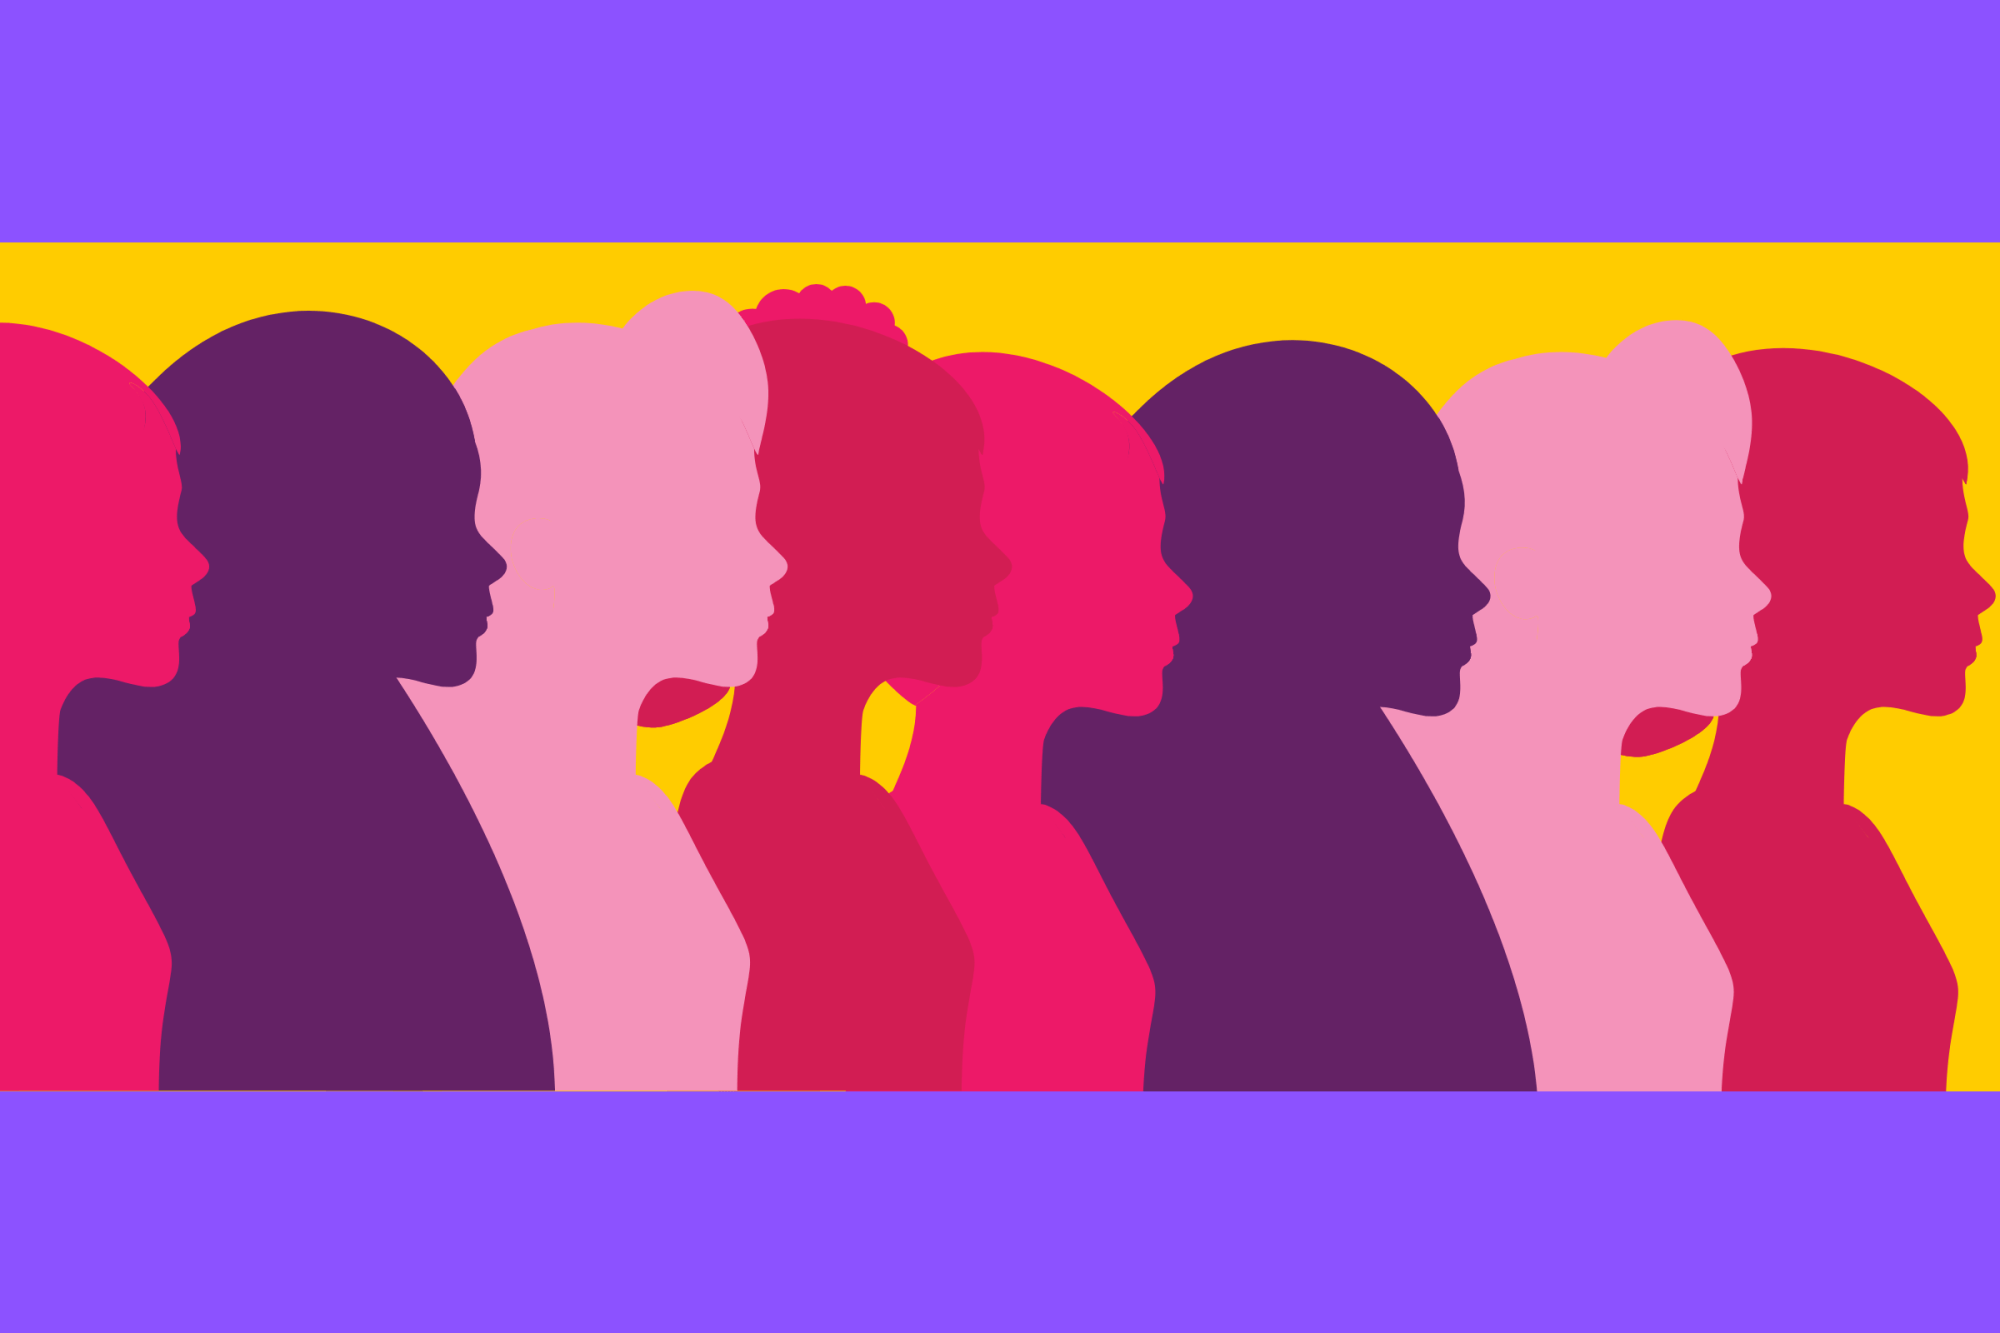 Illustration of women in purple, pink, red with a purple and gold background